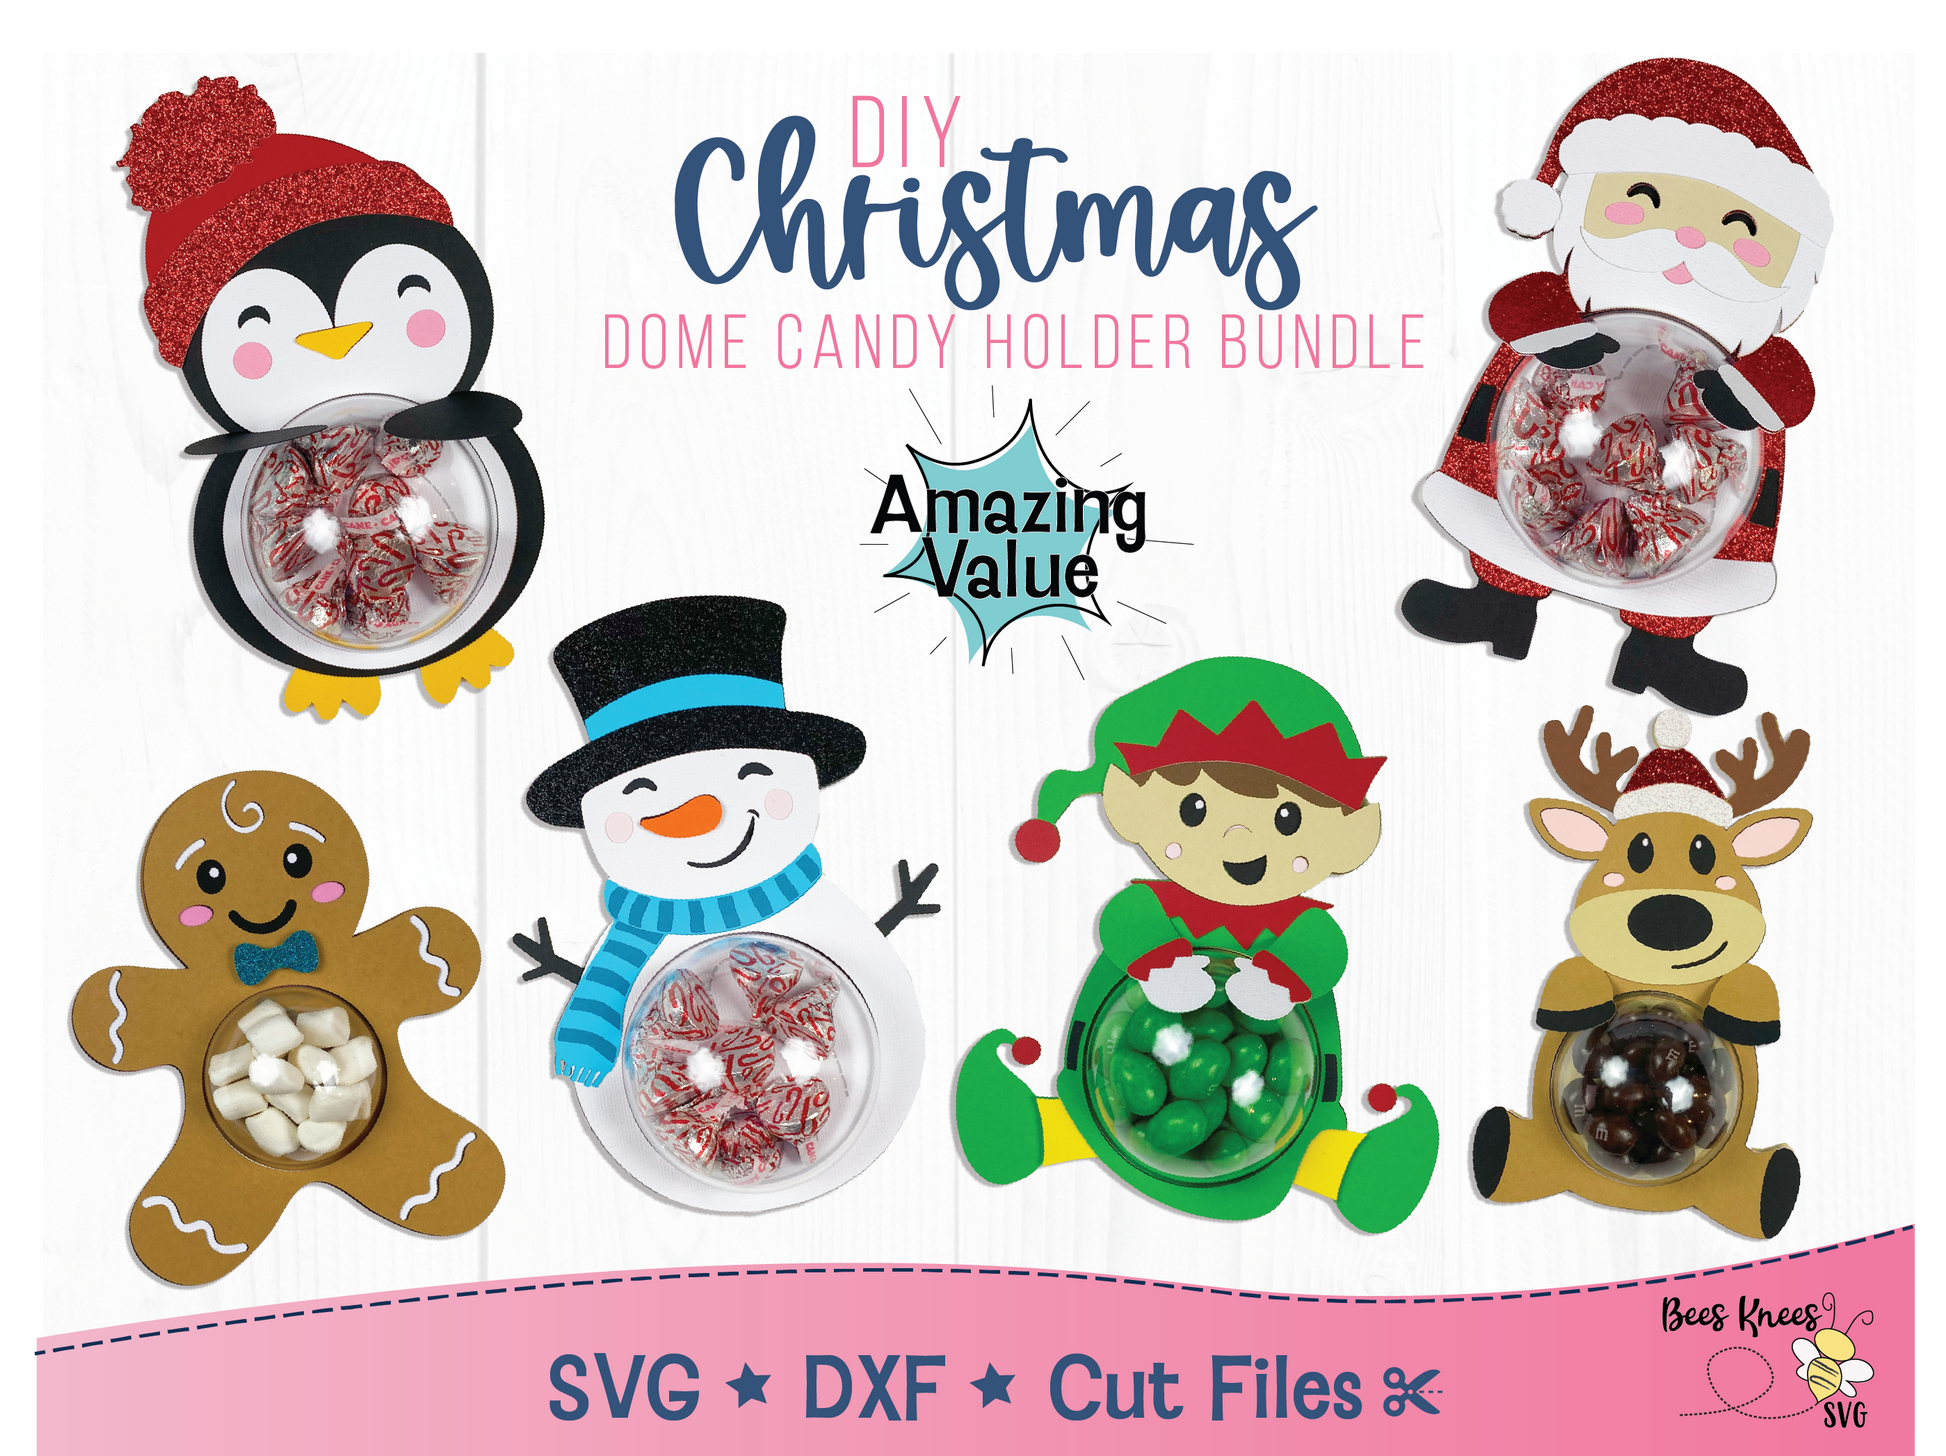 Christmas Bundle Dome Candy Holders. Santa, Penguin with Hat, Gingerbread Man, Snowman, Elf and Reindeer